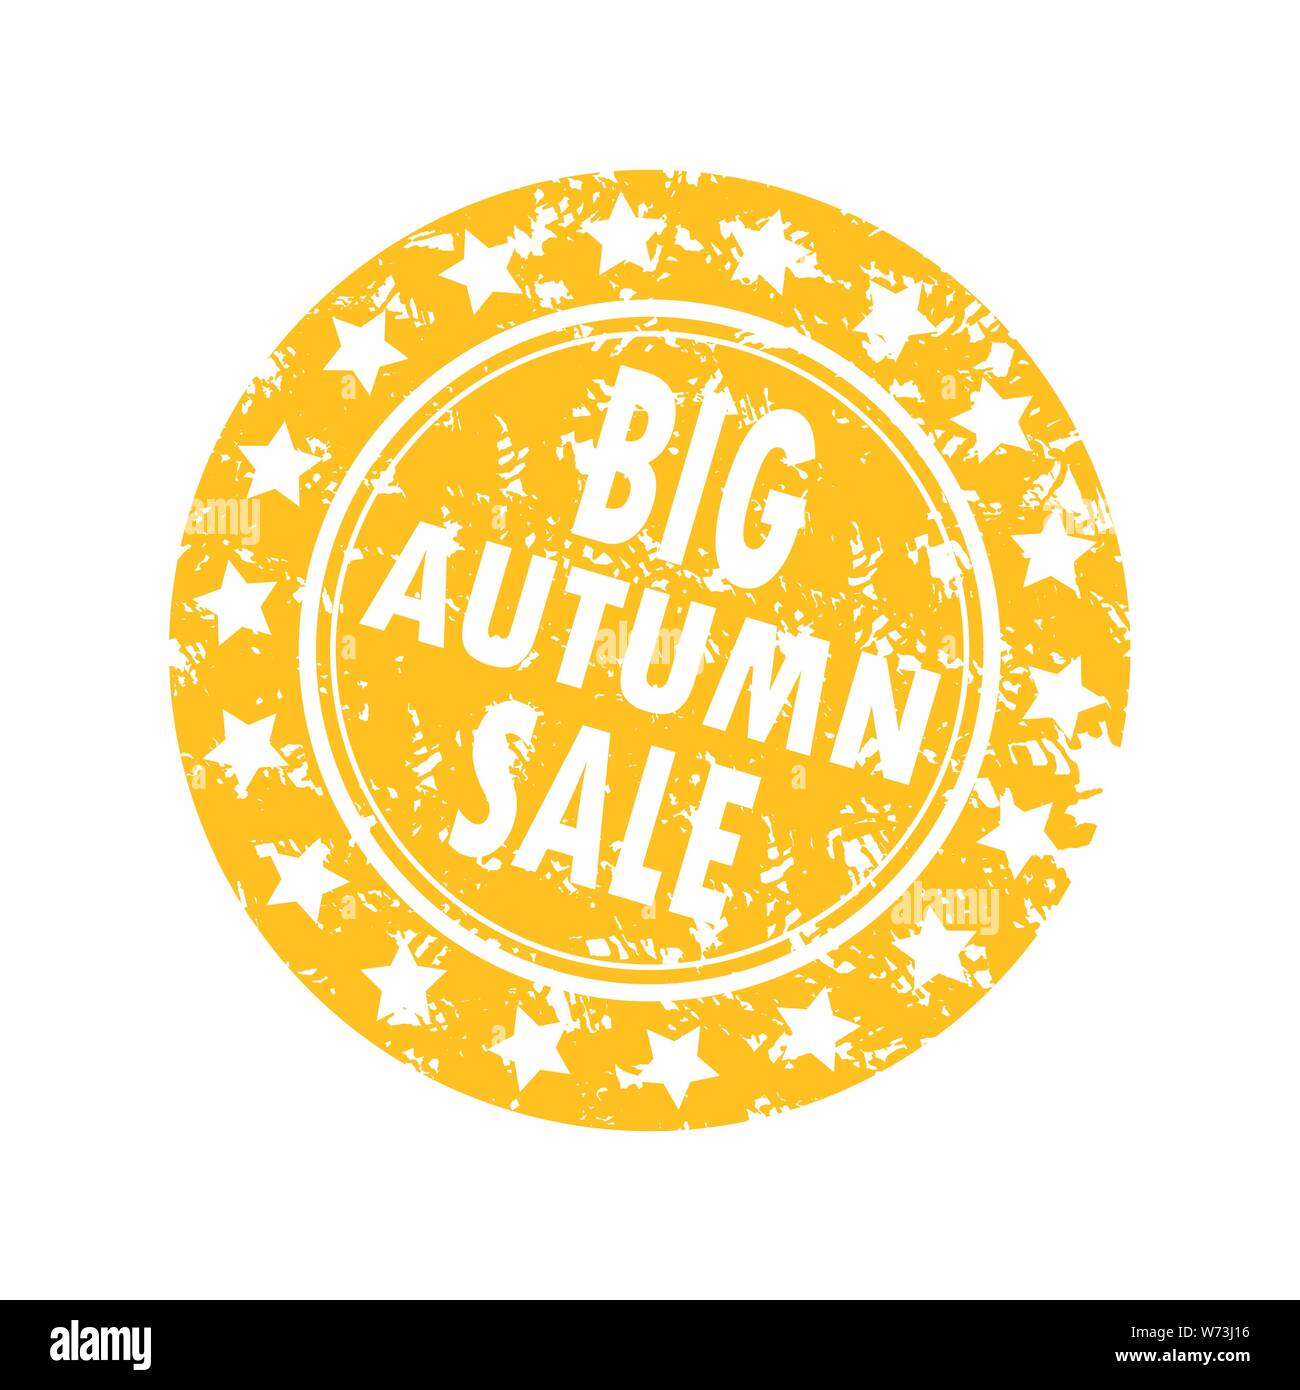 Big autumn sale, promotion advertising stamp. Vector sale autumn inprint, clearance trade, consumerism mark for sell-out collection illustration Stock Vector